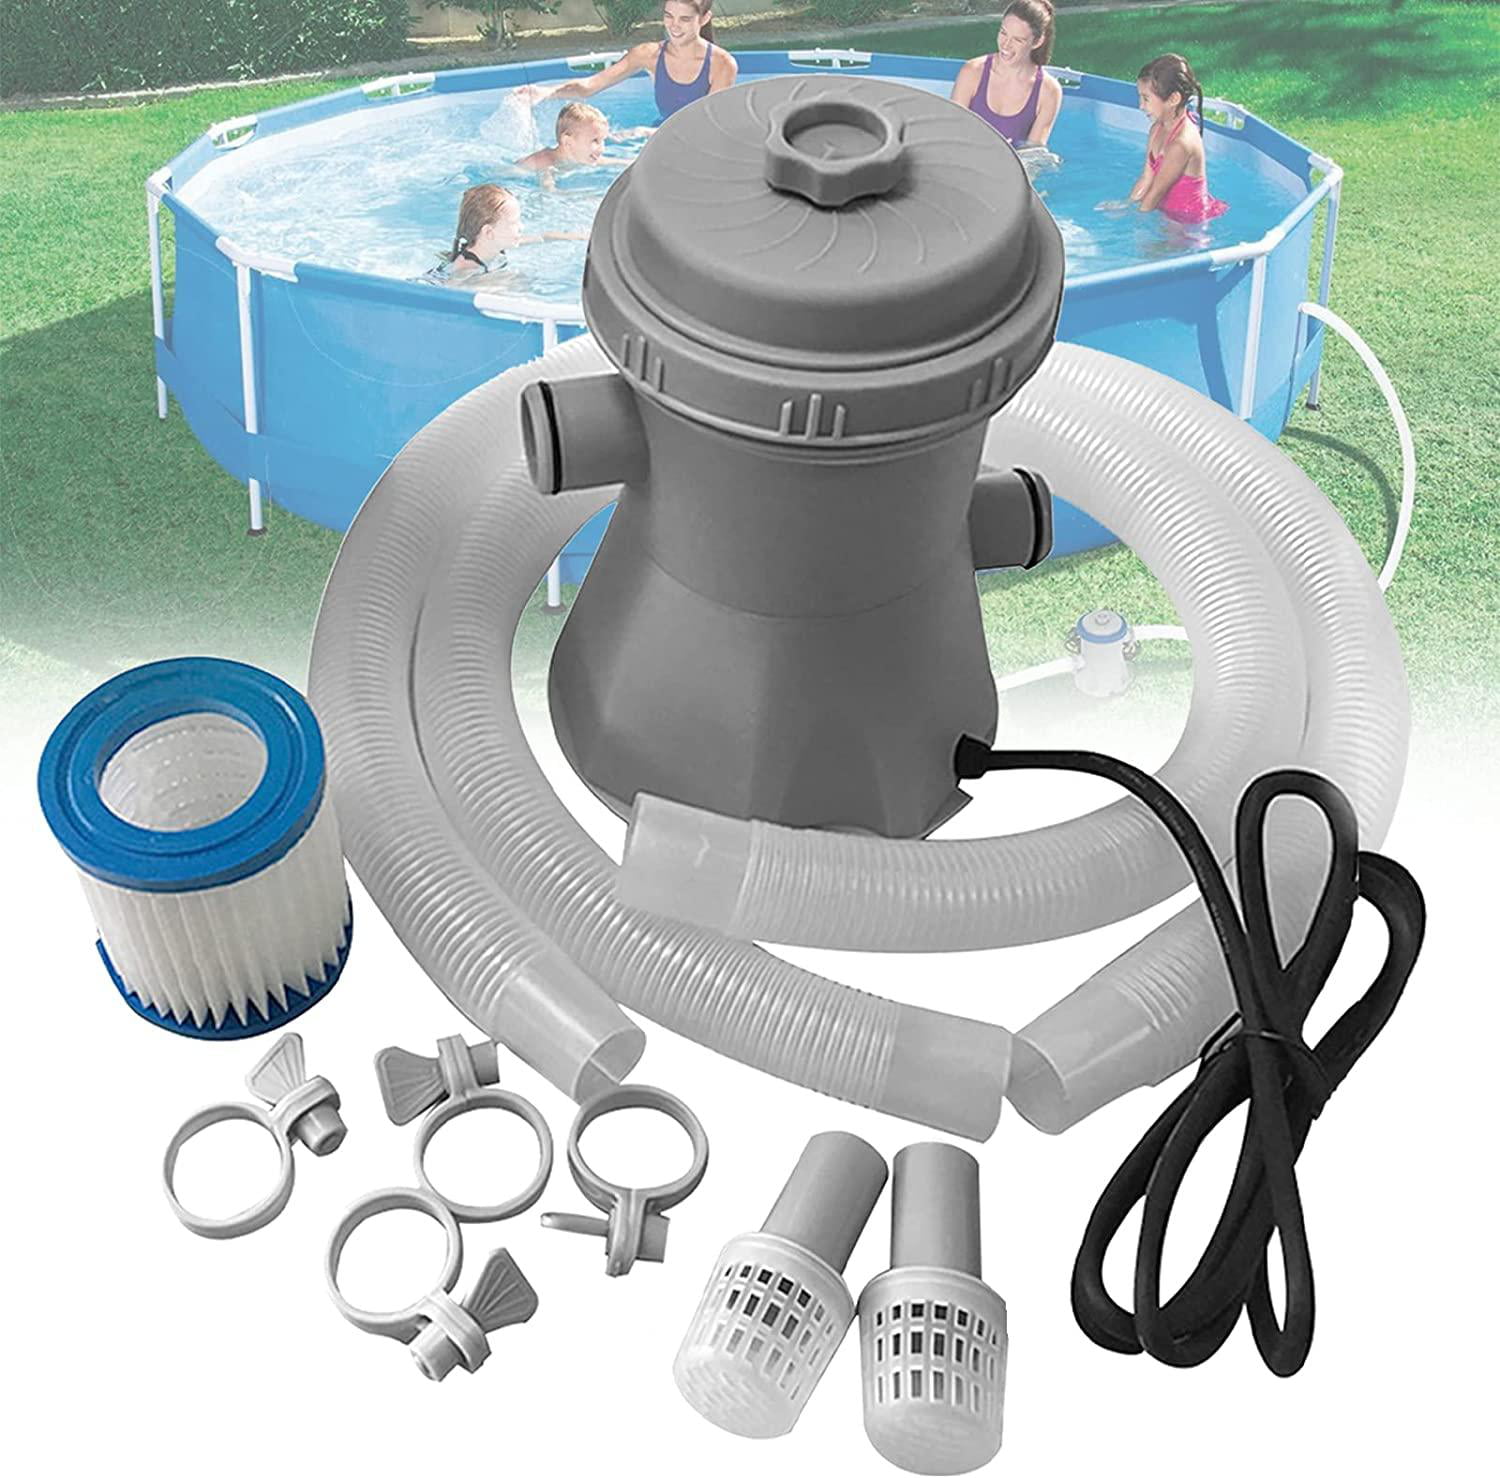 Electric Swimming Pool Filter Pump Water Cleaning Above Ground Pool US PLUG 